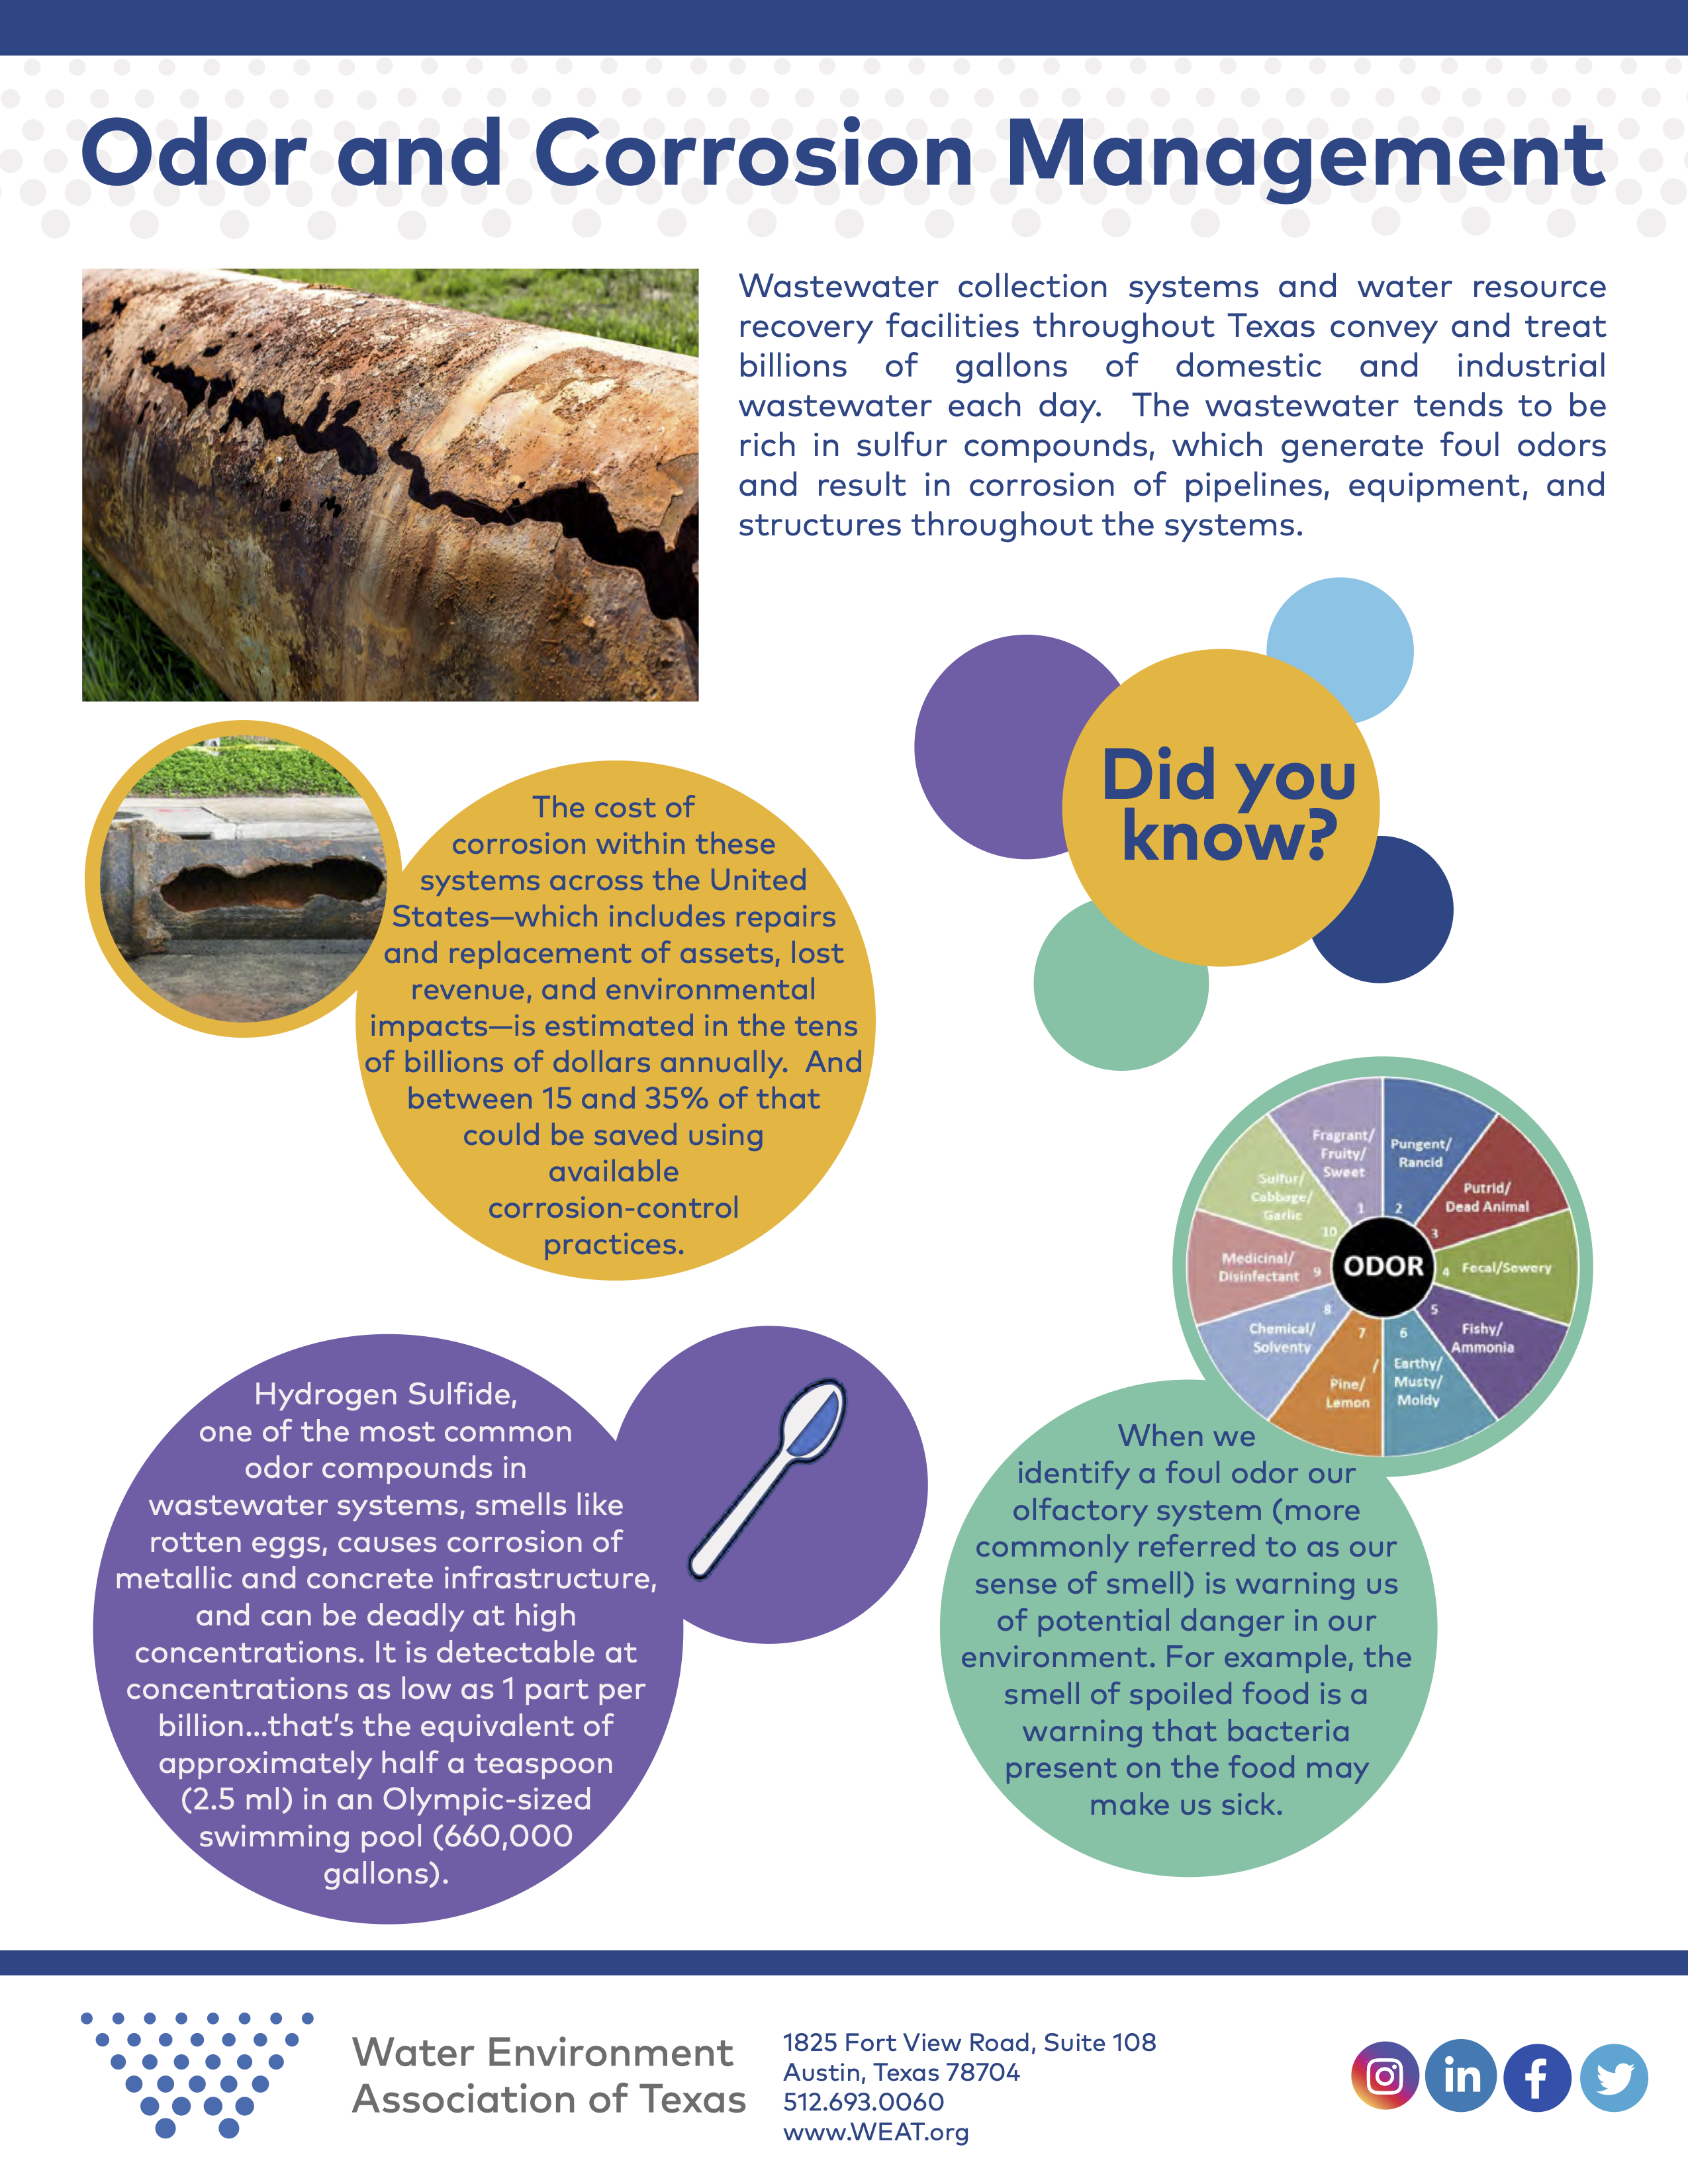 Odor & Corrosion Management Fact Sheet